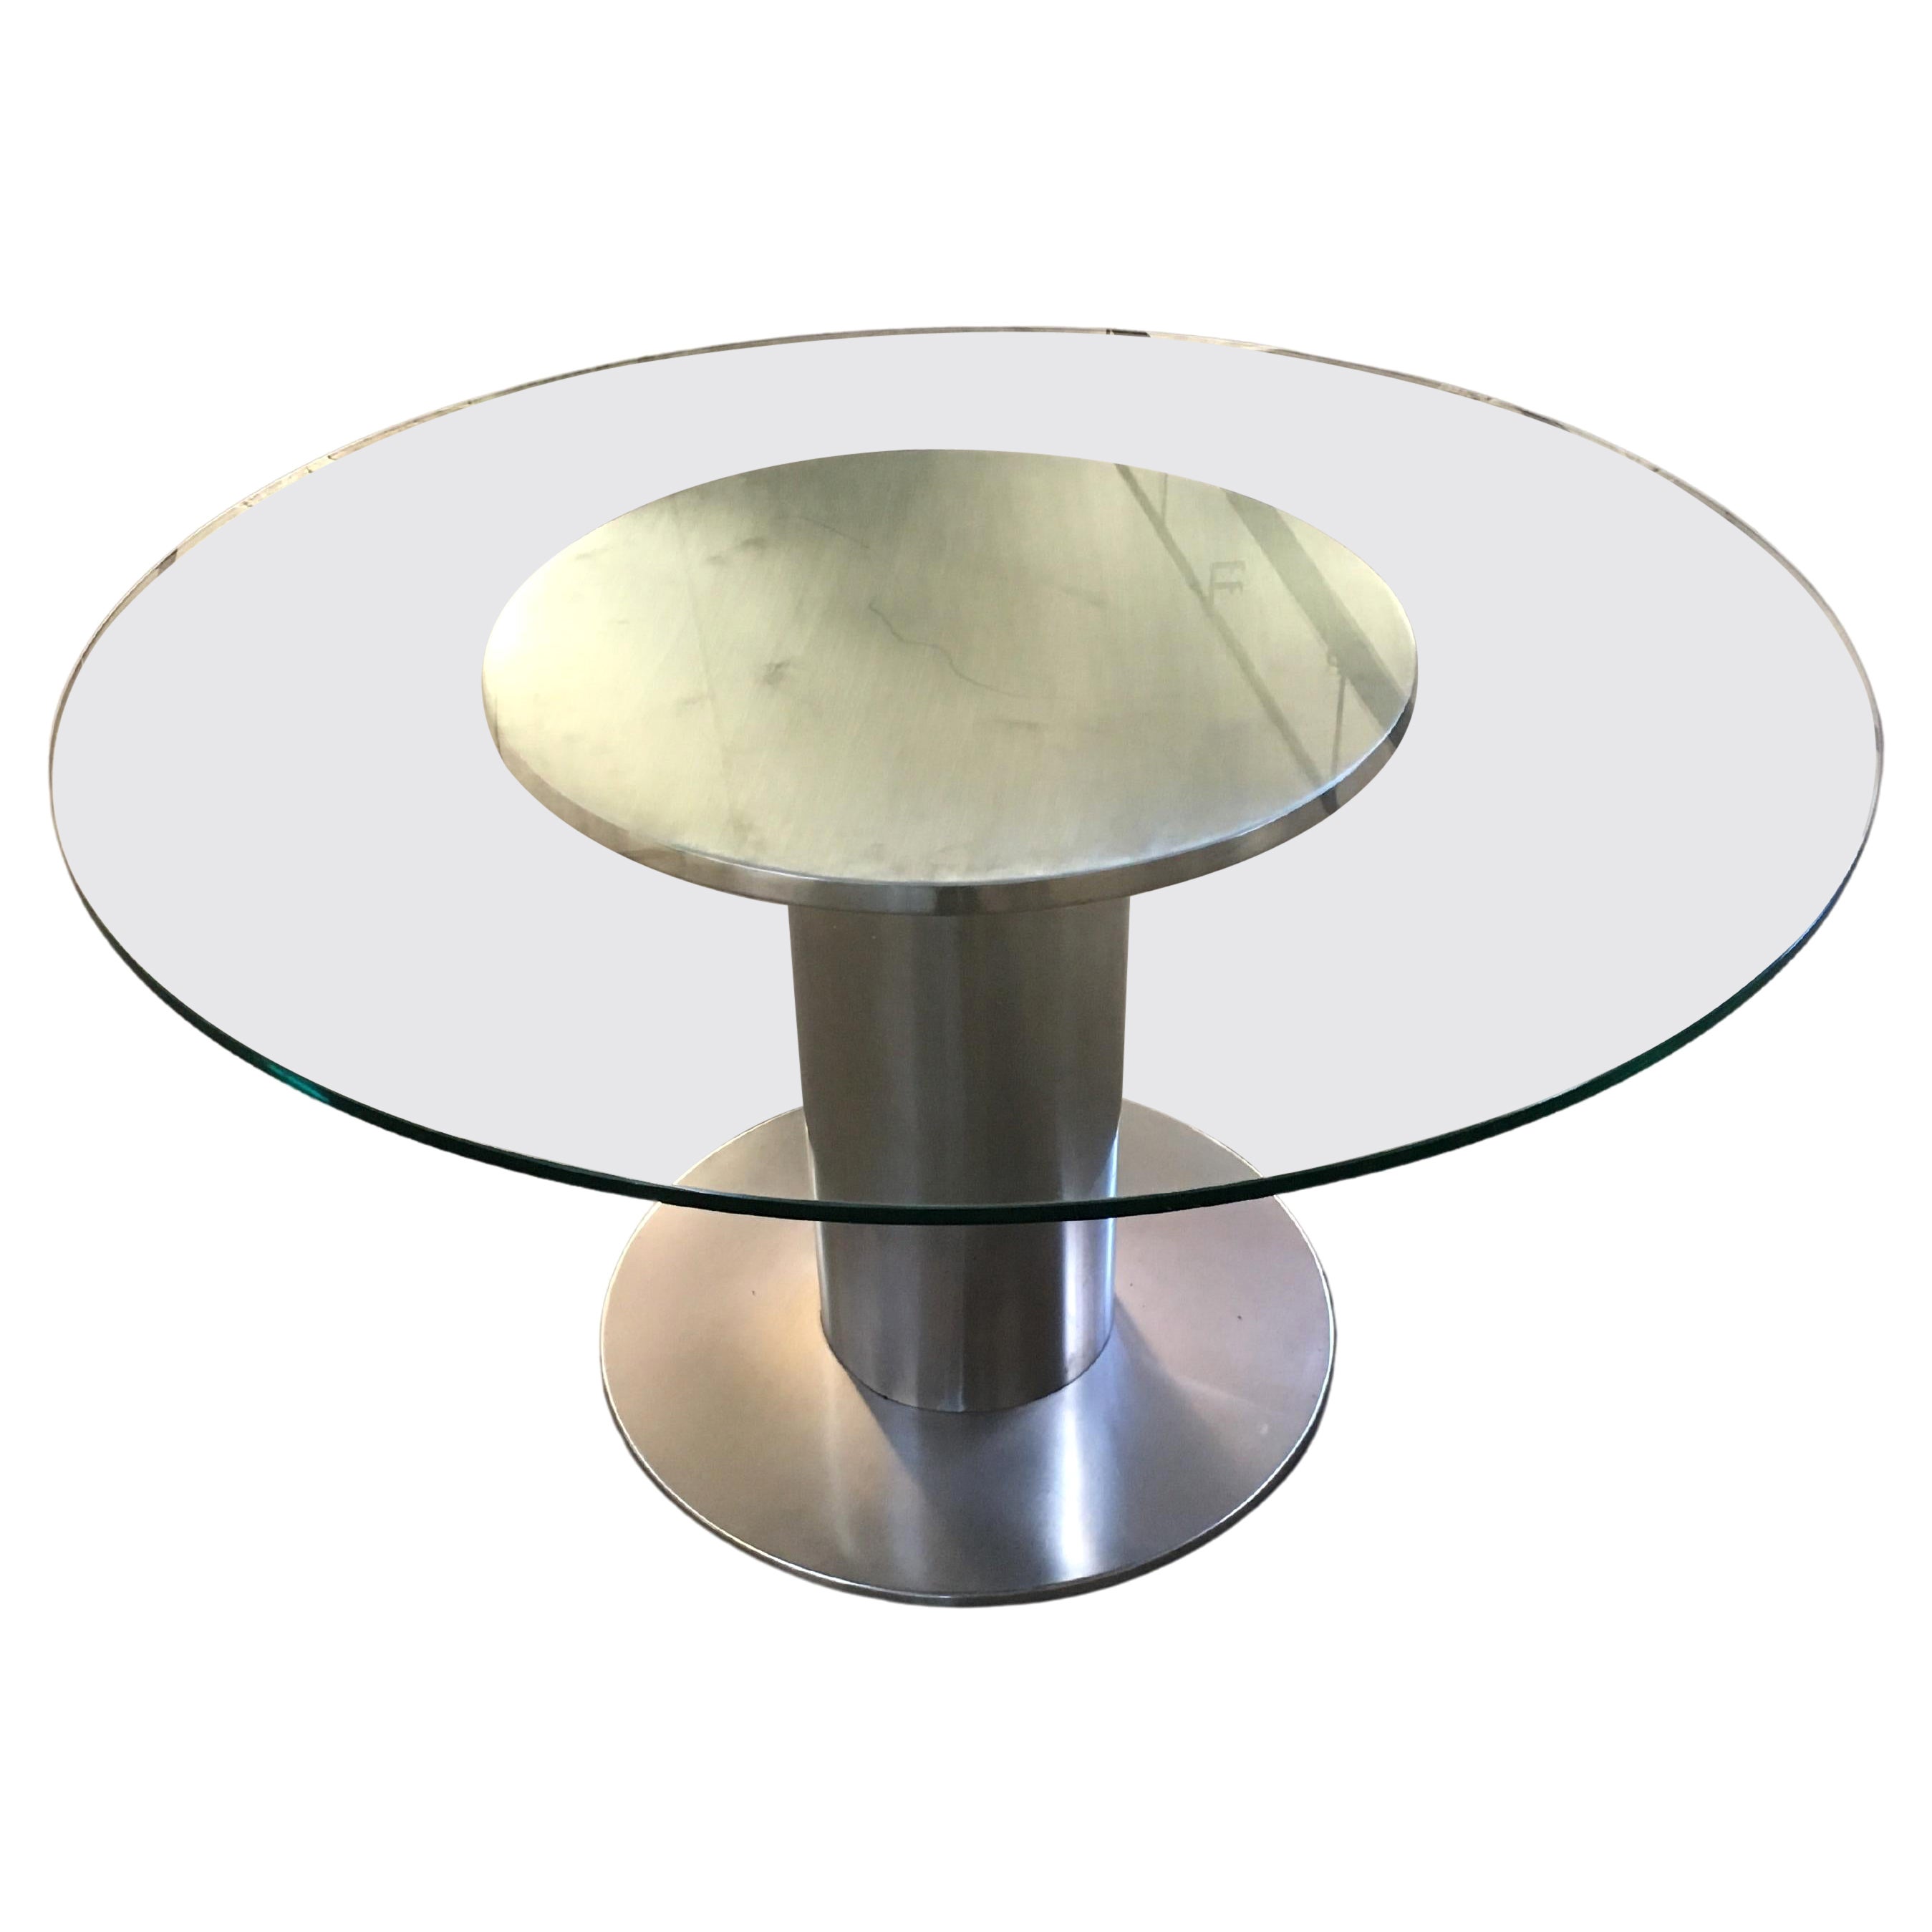 Mid-Century Modern Italian Chrome Table with Round Glass Top from 1970s For Sale